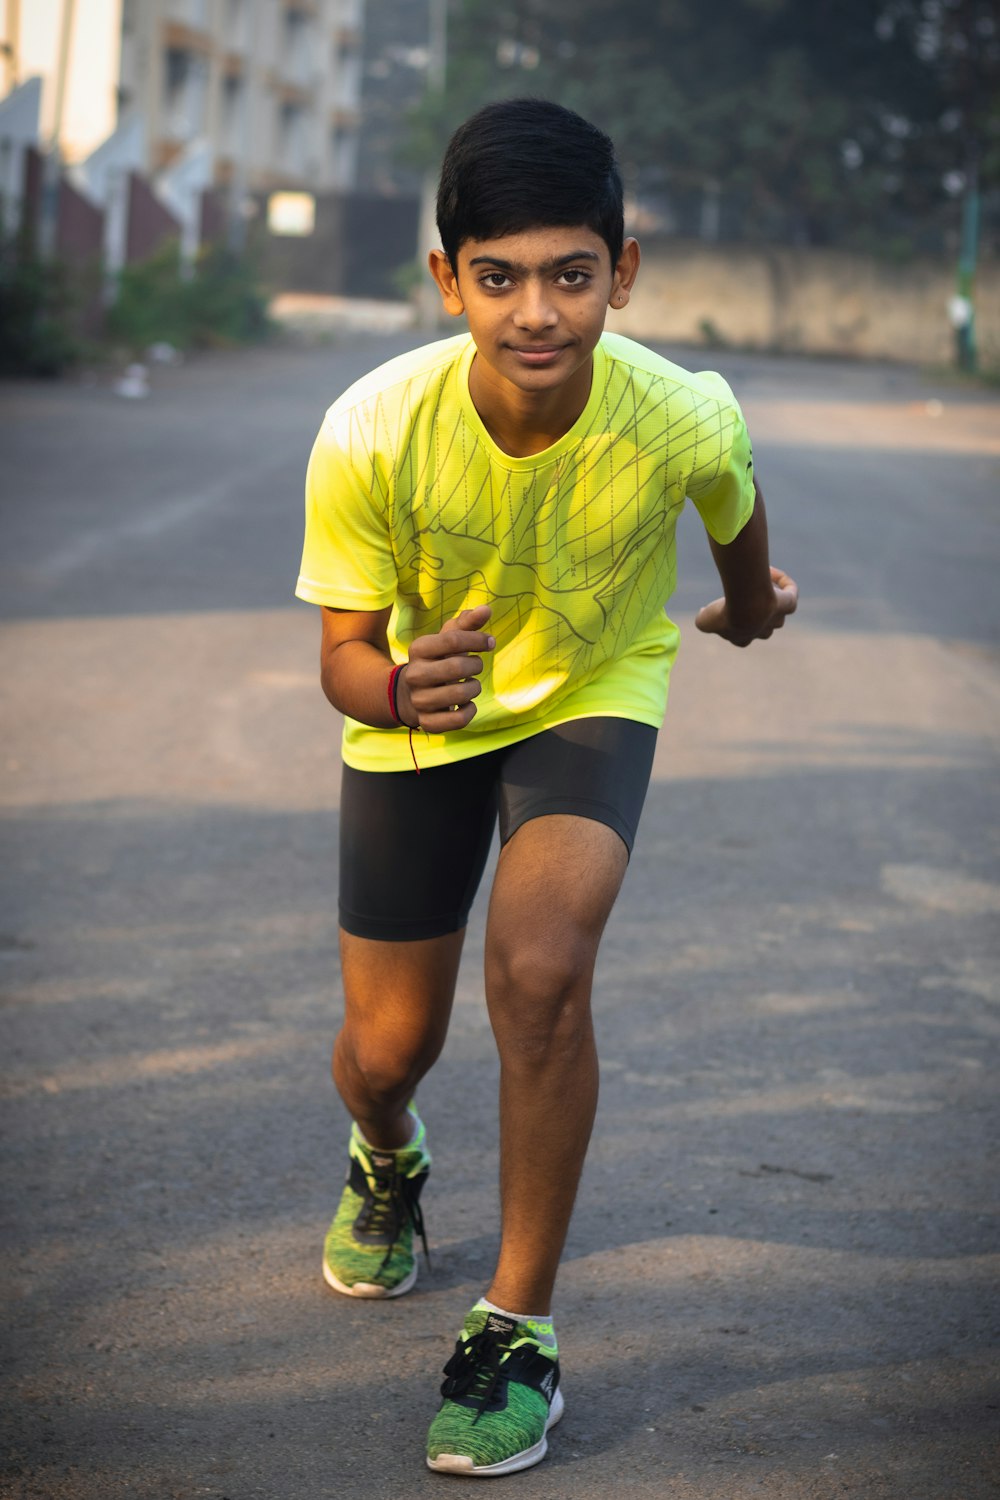 a young man in a yellow shirt is running